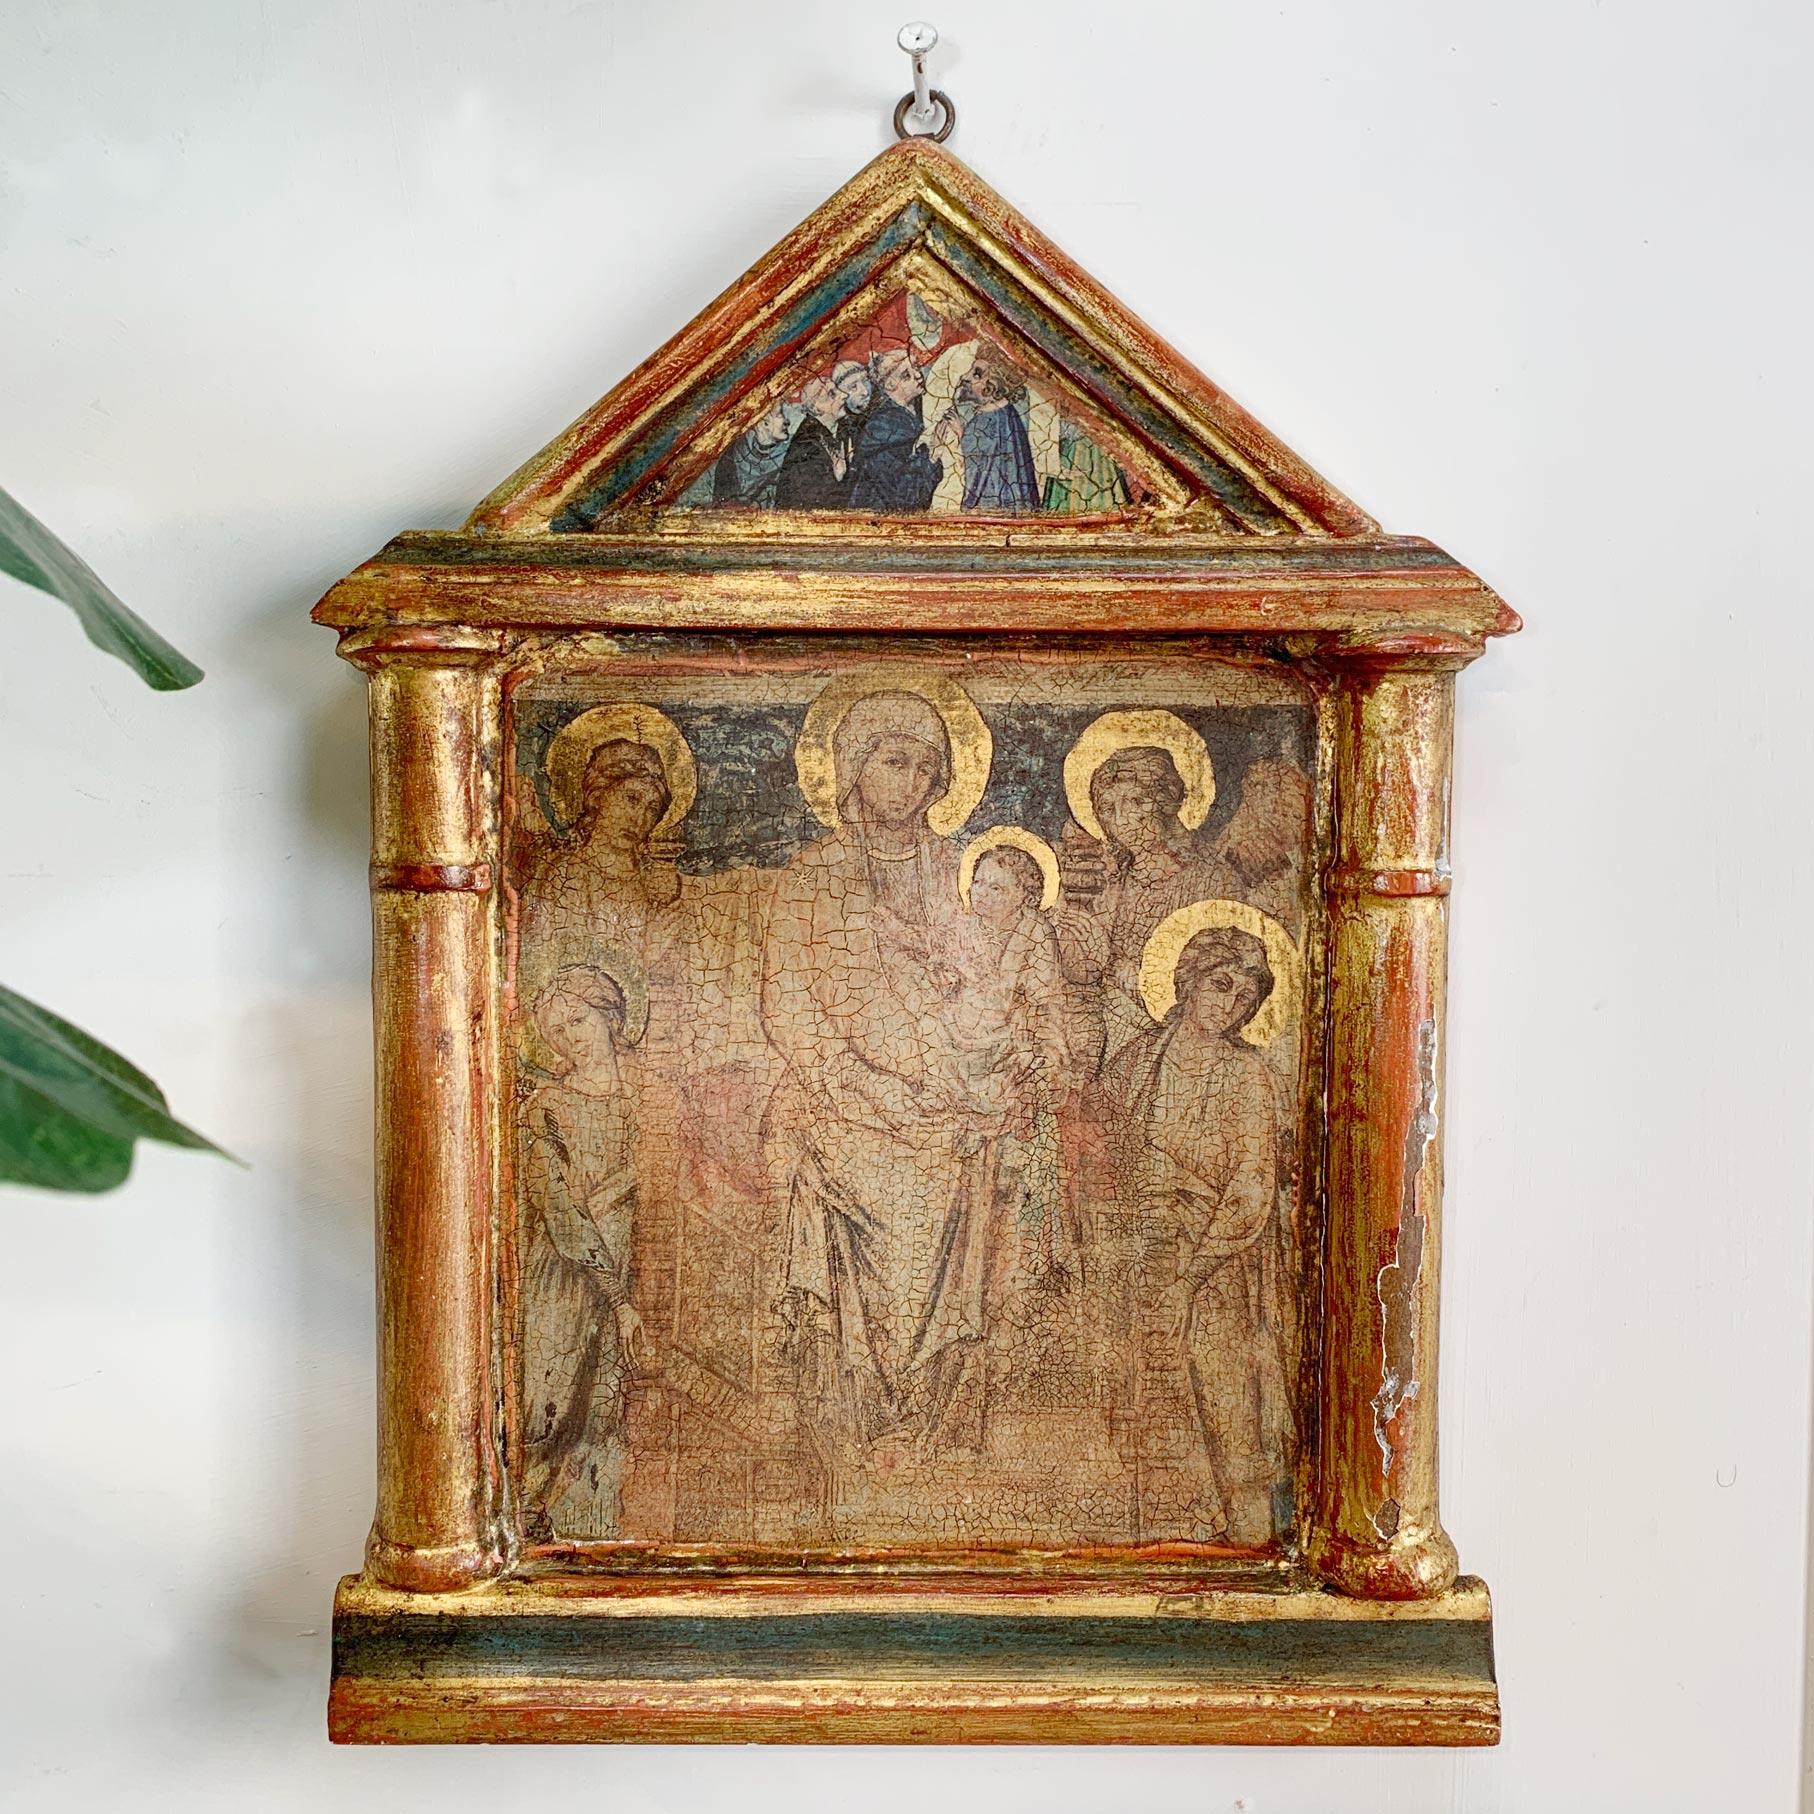 Late 19th century Icon painting on wood, the arched frame with applied gesso and gilt. The beautifully painted image is of The Virgin Mary, holding the infant Jesus, surrounded by Angels.

We believe this is a Greek Orthodox Icon, although it could